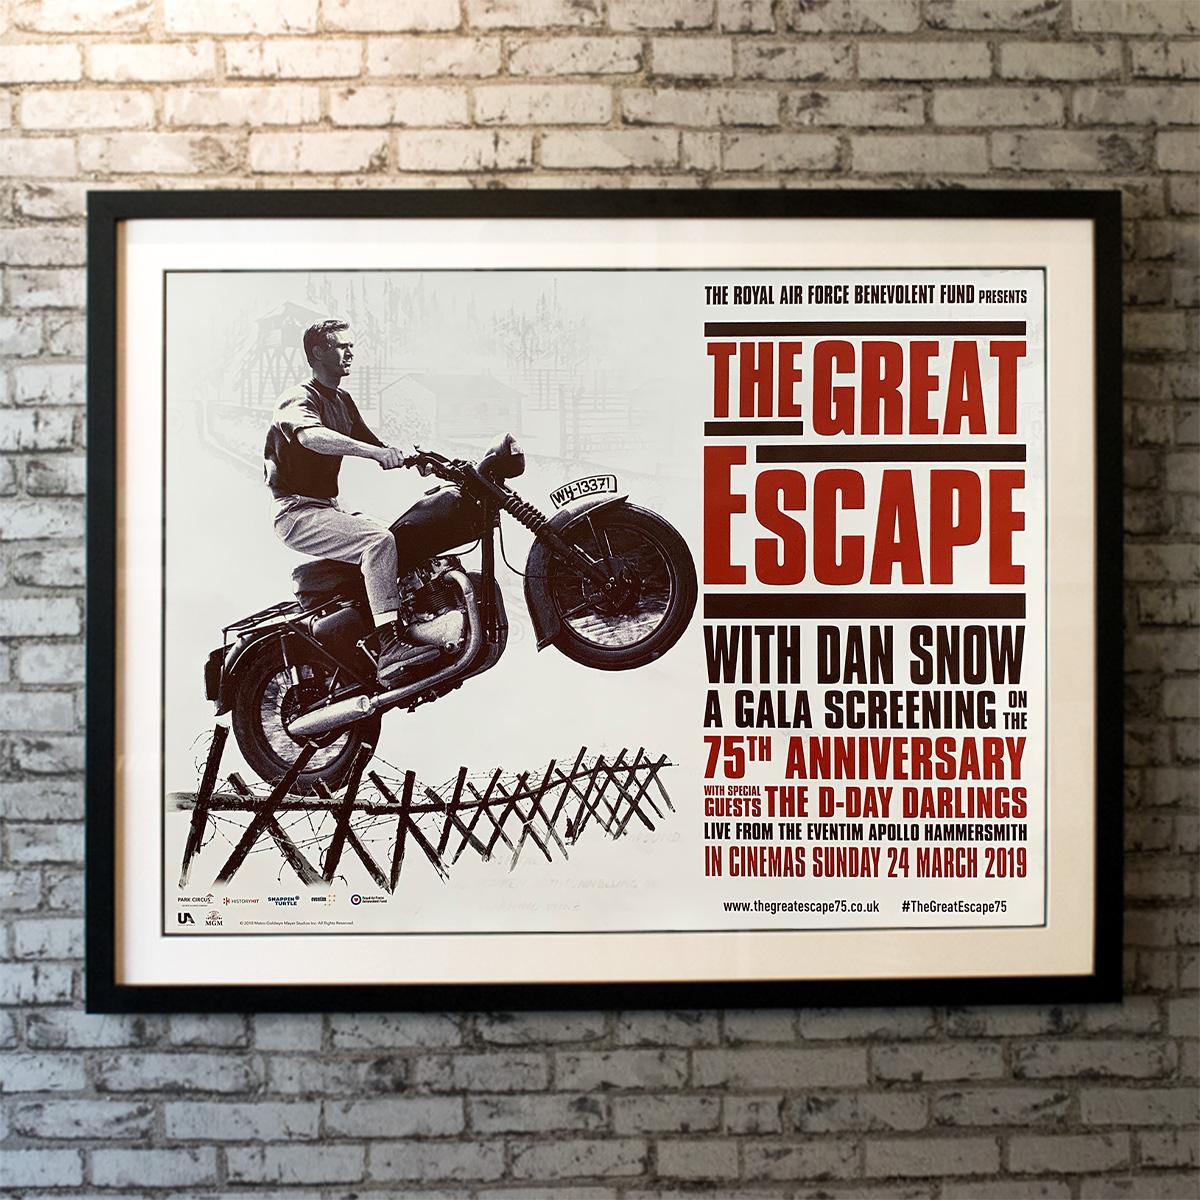 Park Circus and Metro-Goldwyn-Mayer have partnered with the Royal Air Force Benevolent Fund, the Royal Air Force's leading welfare charity, to commemorate the 75th anniversary of The Great Escape. The Great Escape with Dan Snow took place at the